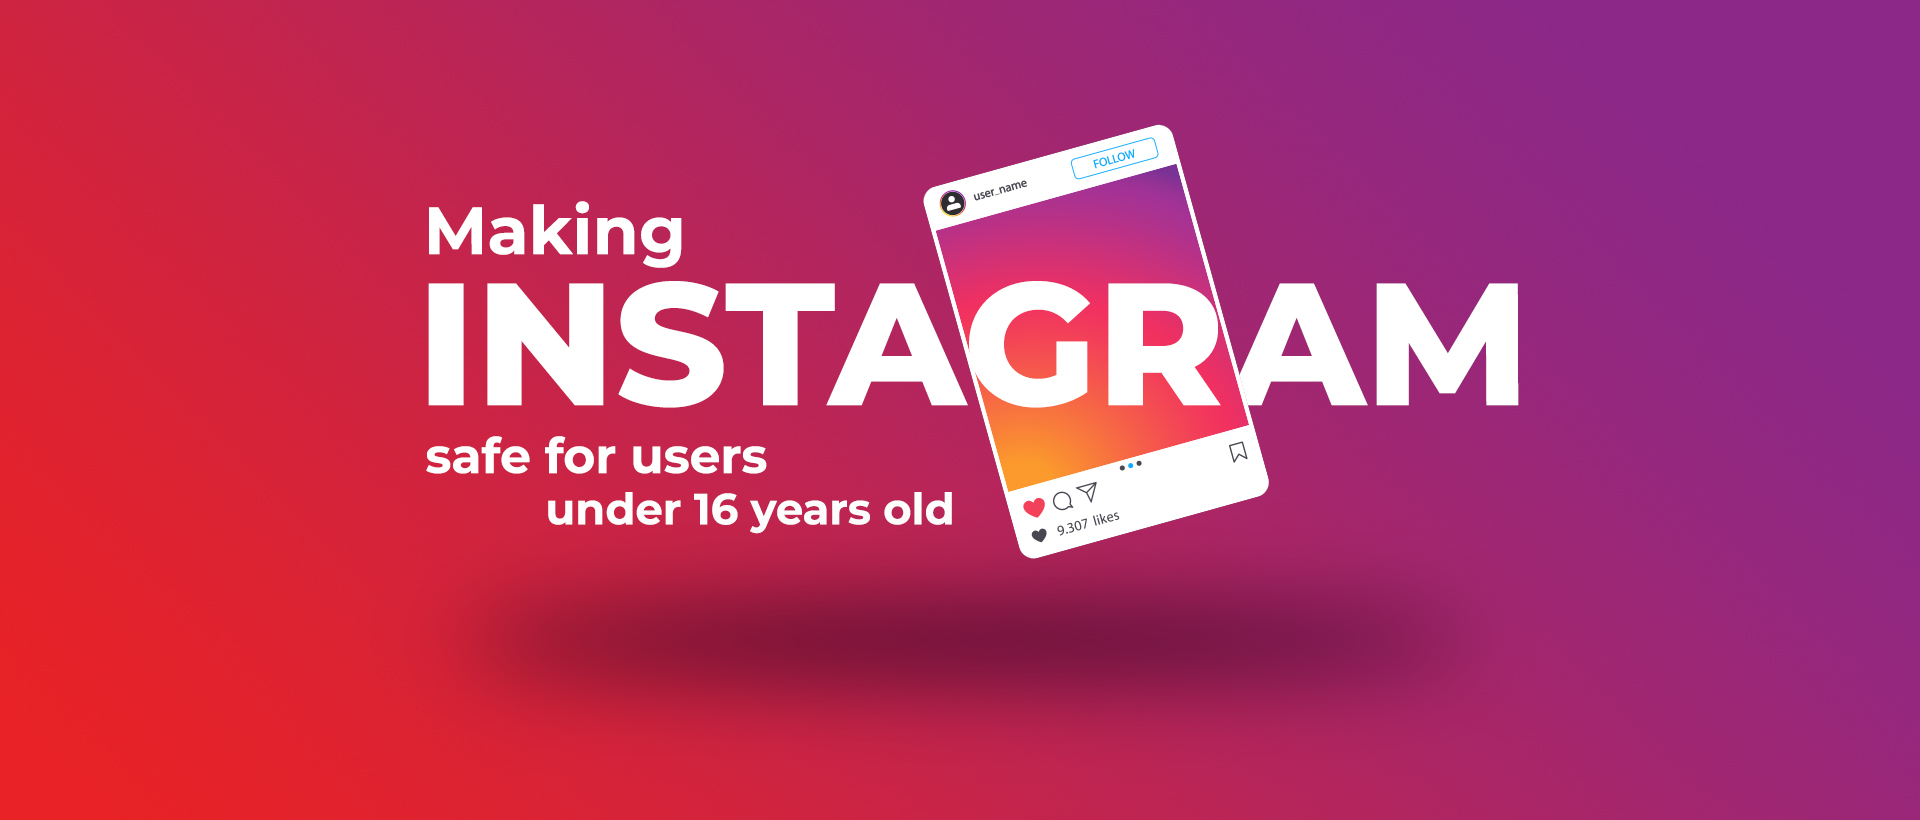 Making Instagram safe for users under 16 years old